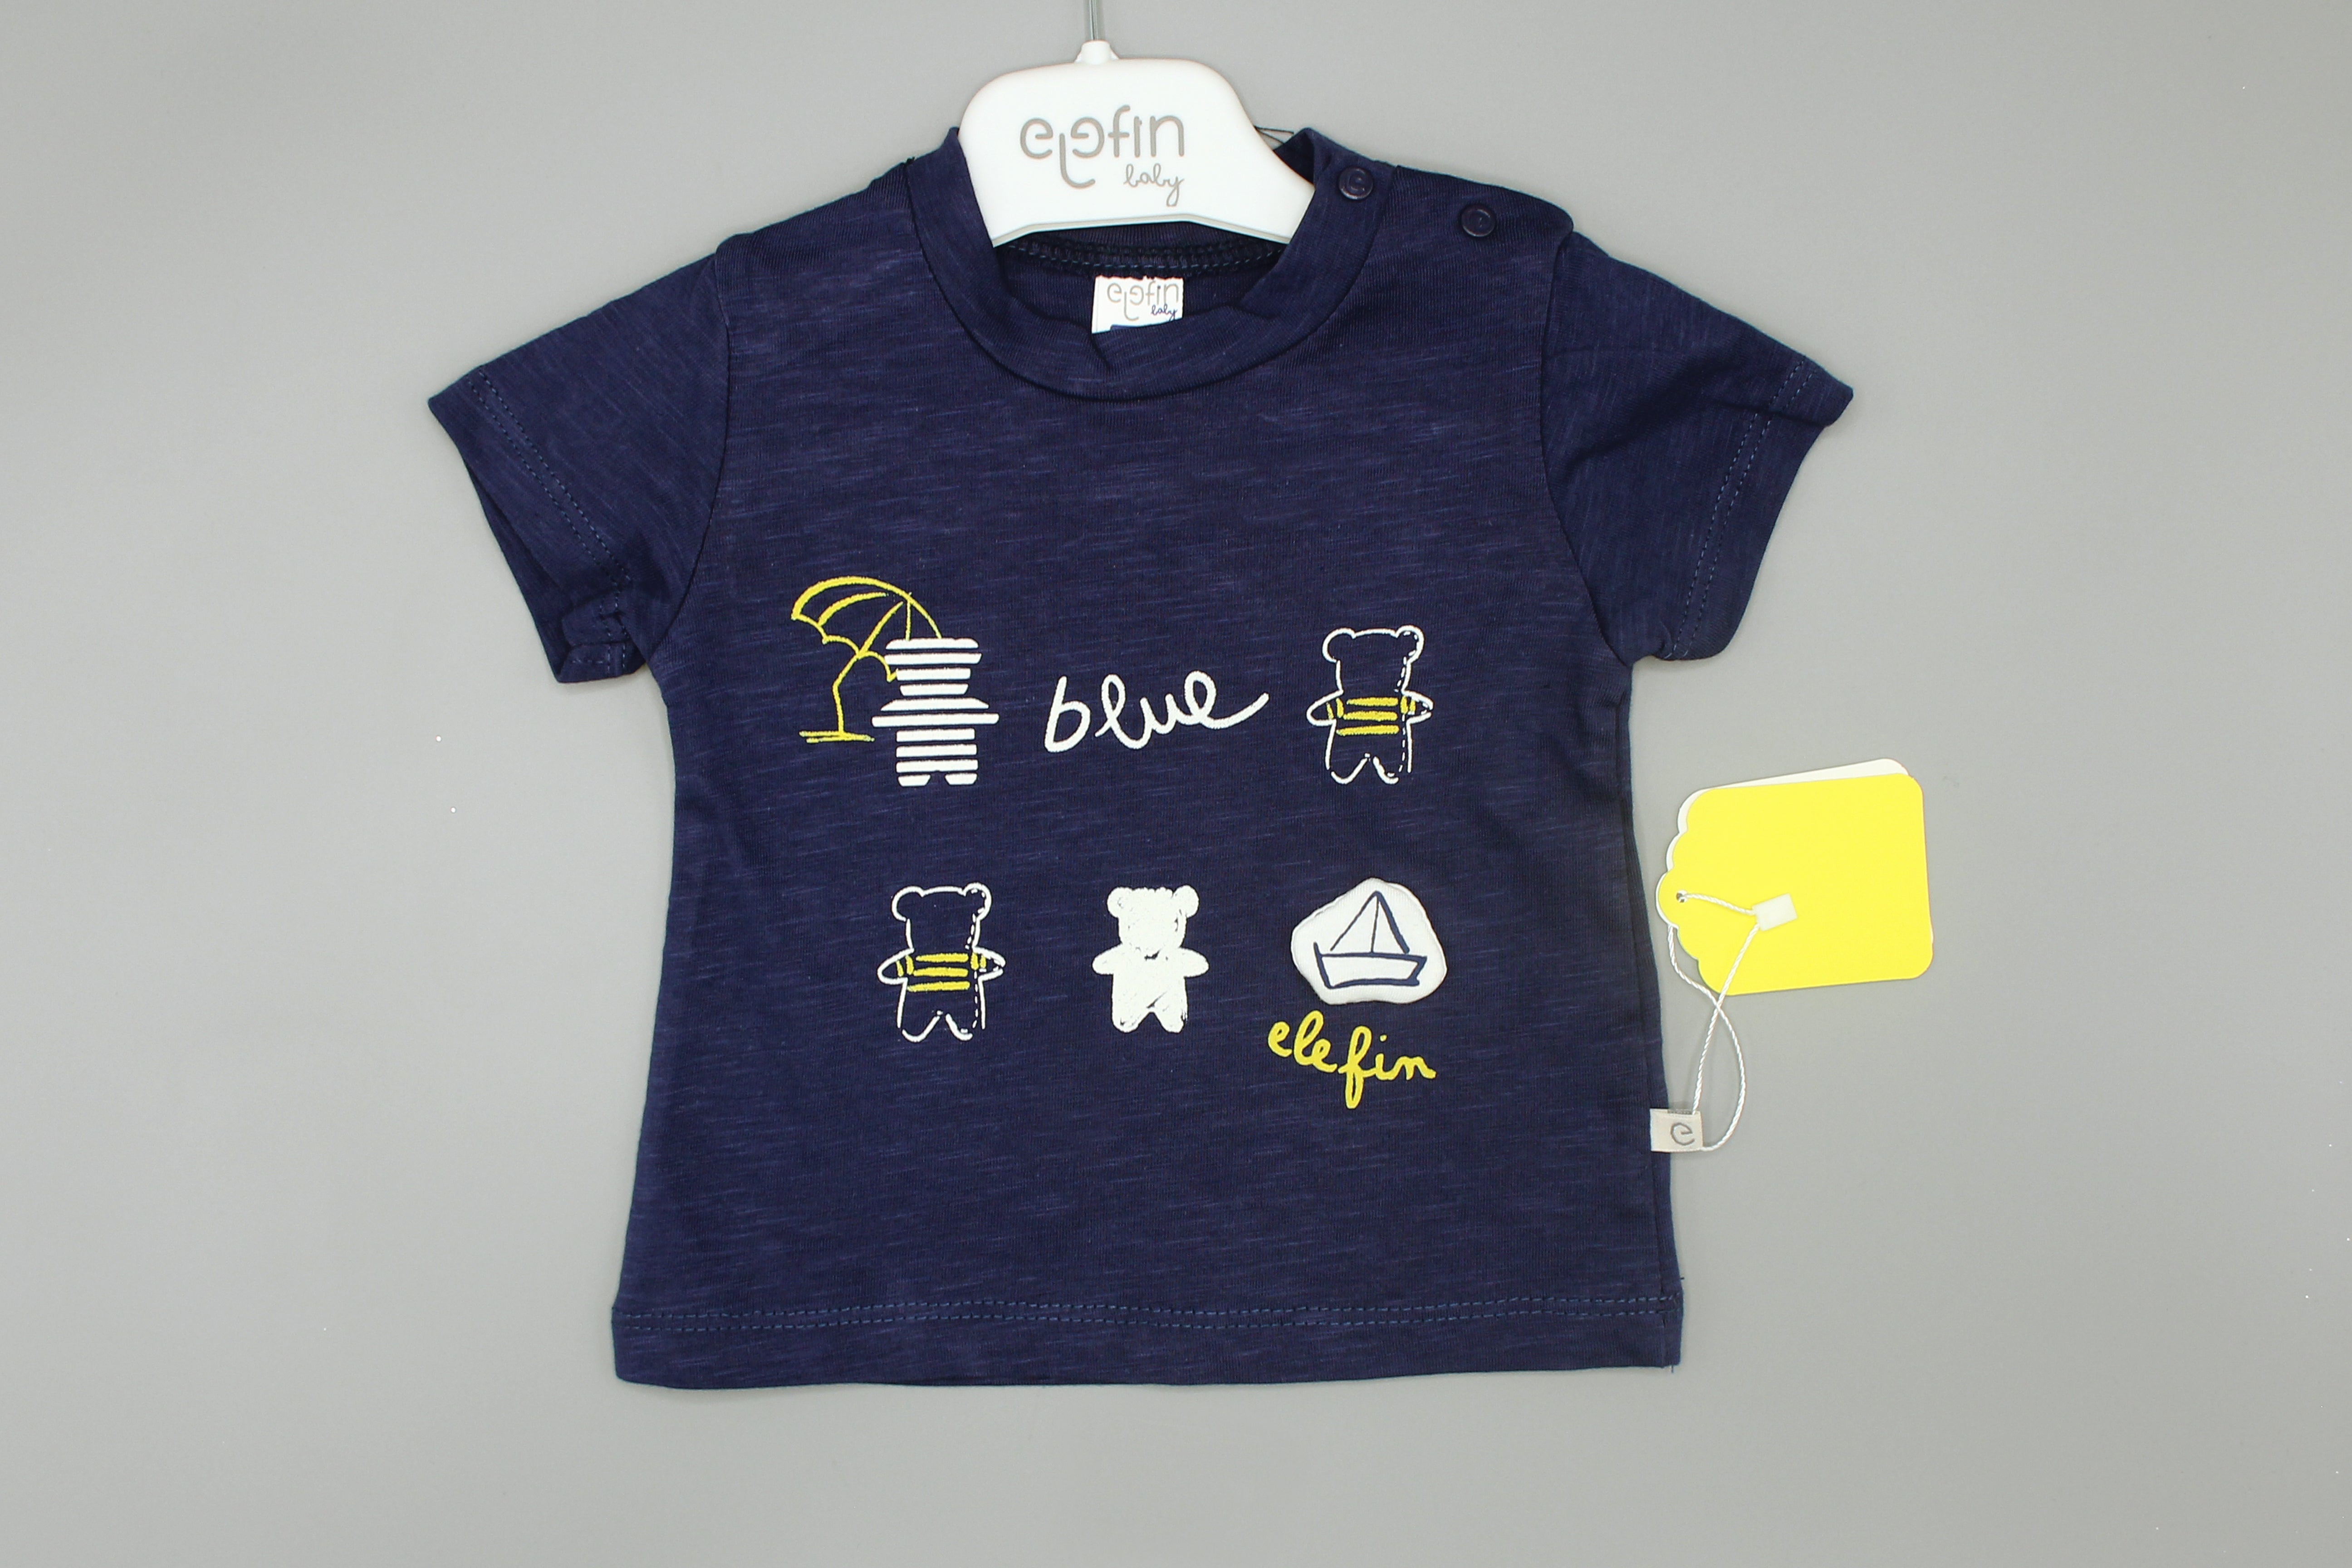 BABY BOY OUTFIT - 29241